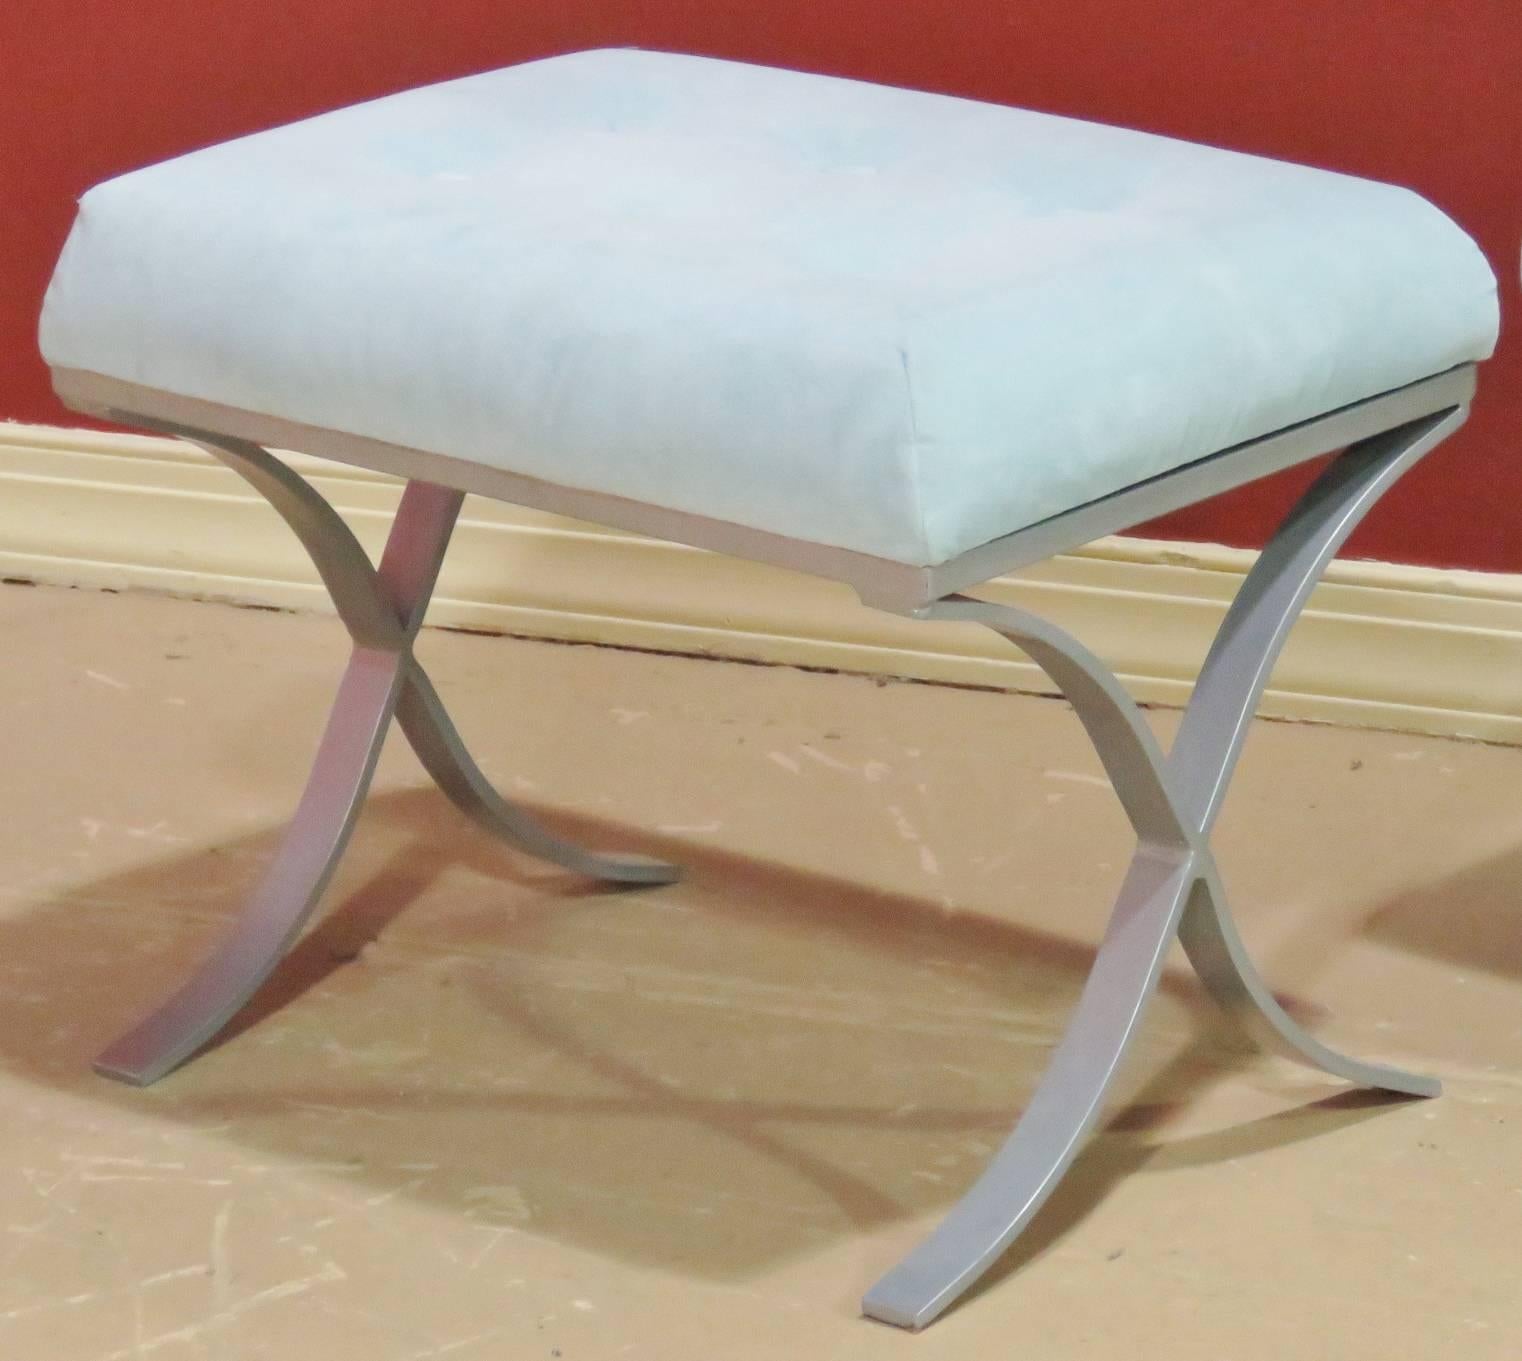 Gray painted metal frame. Blue tufted upholstered seat.